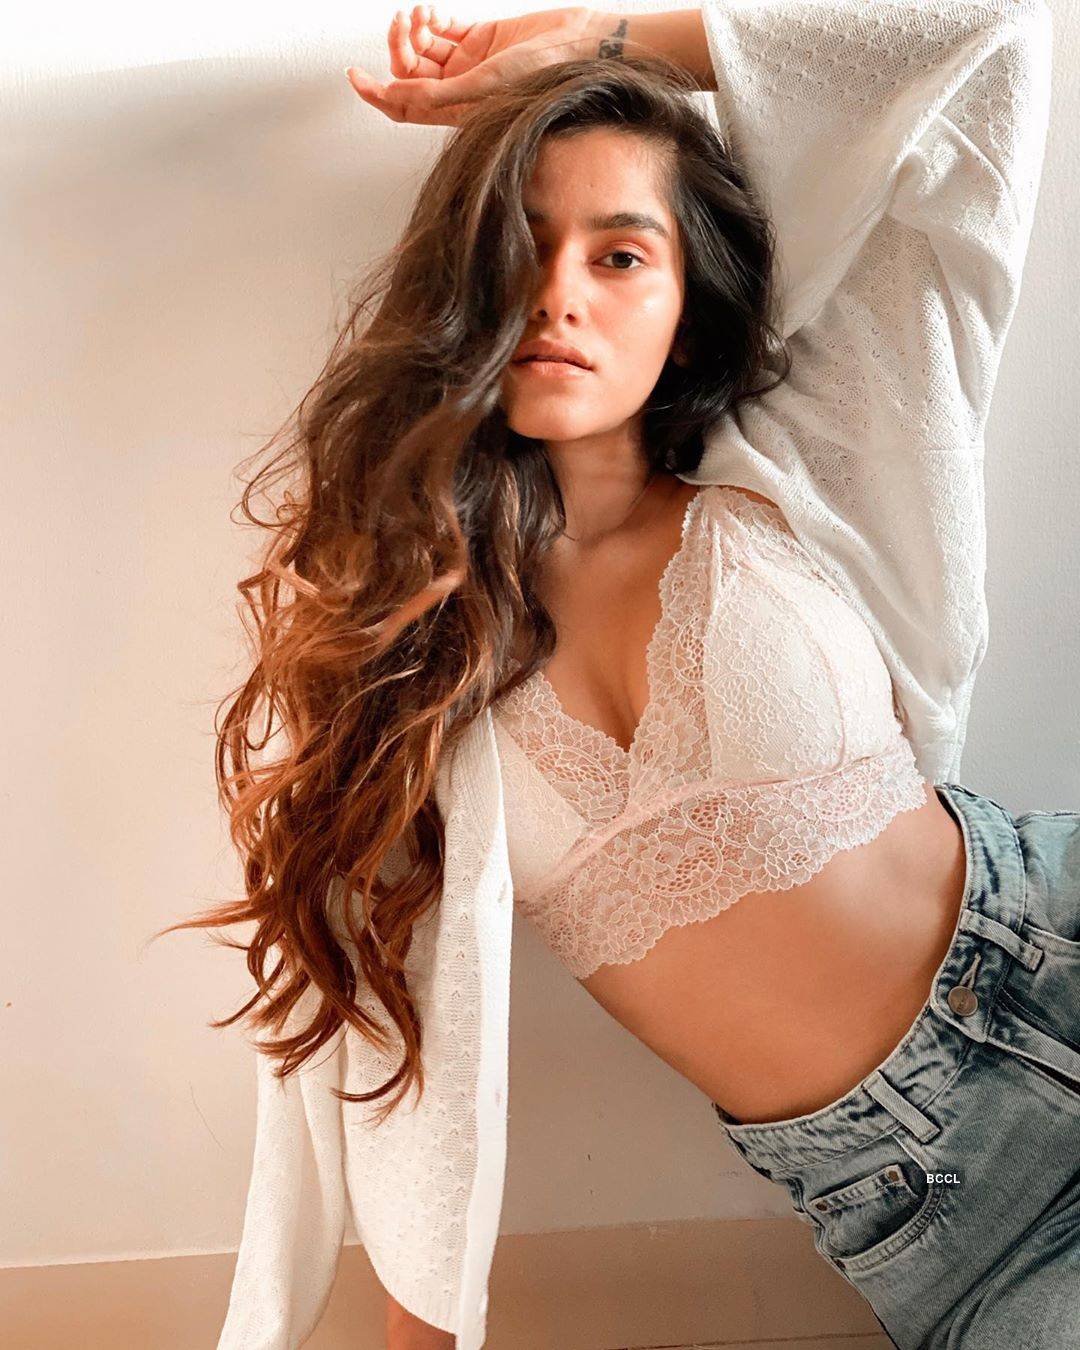 These ravishing pictures of glam doll Meghna Kaur are too good to miss!